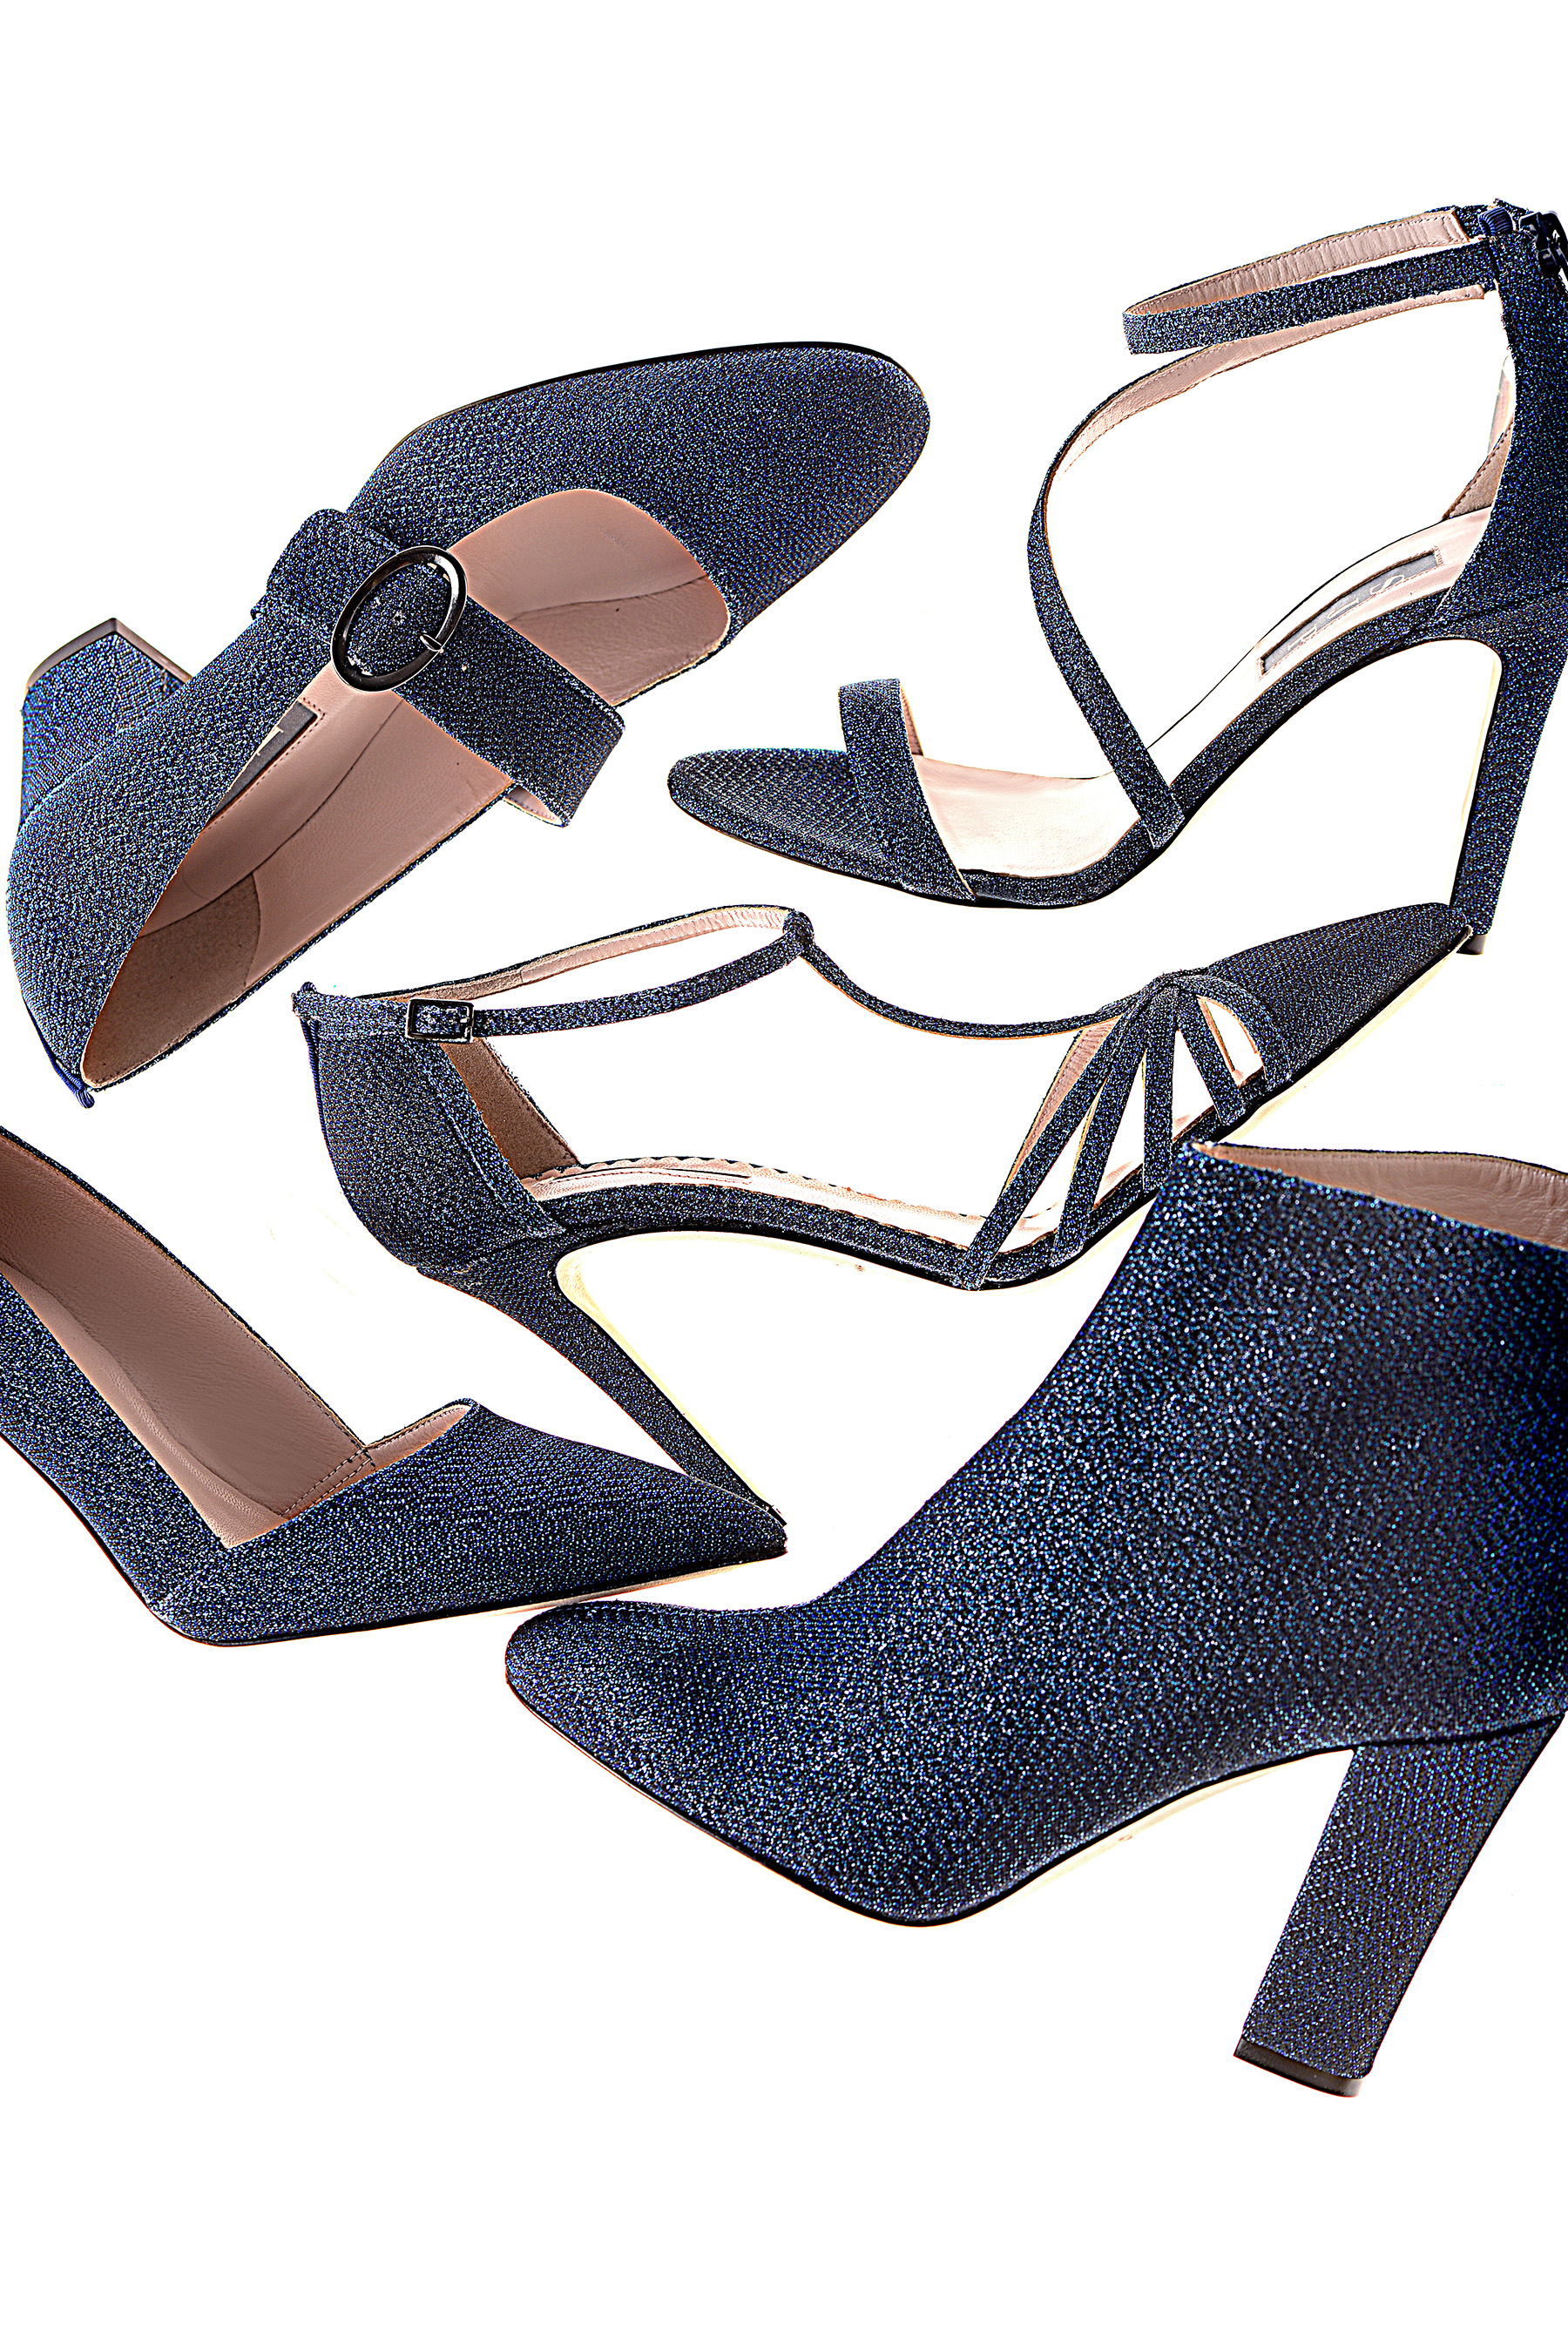 SJP by Sarah Jessica Parker Shoes in exclusive Bellagio Blue Hue